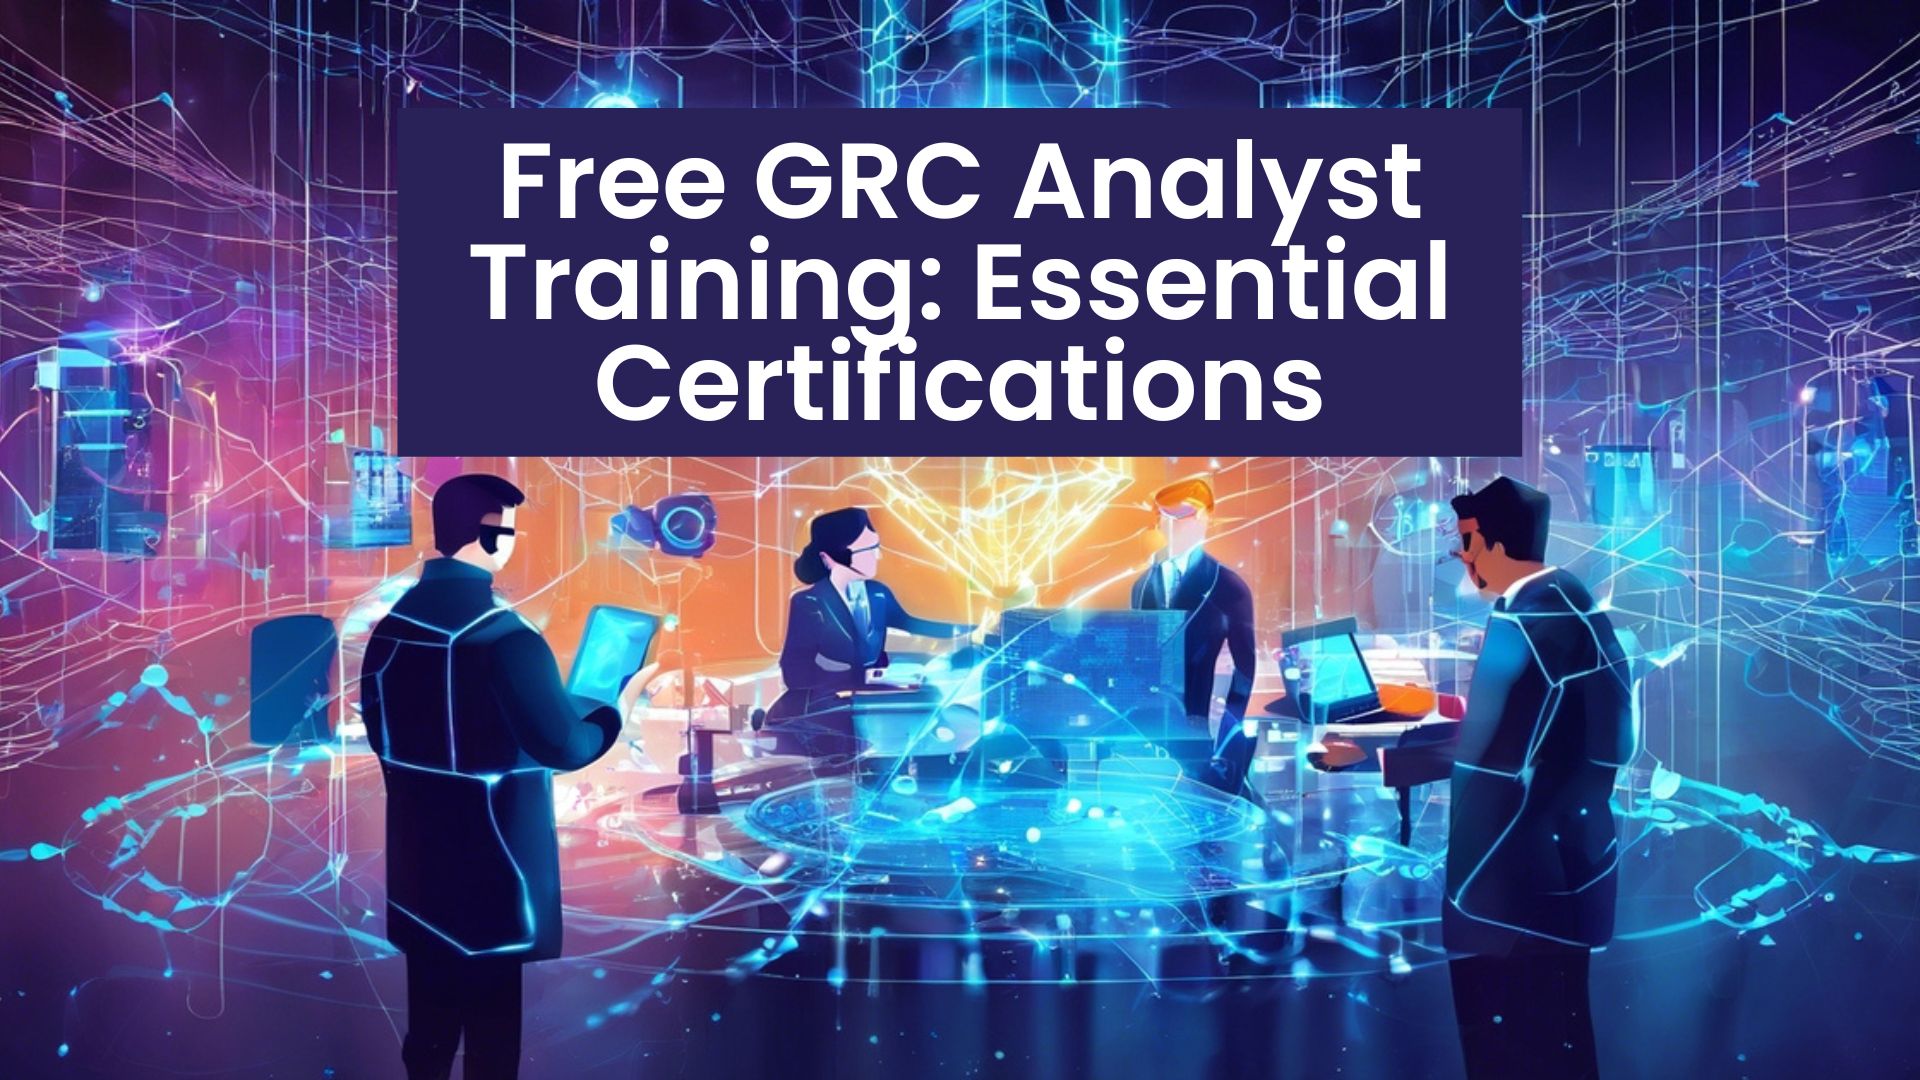 Free GRC Analyst Training Essential Certifications